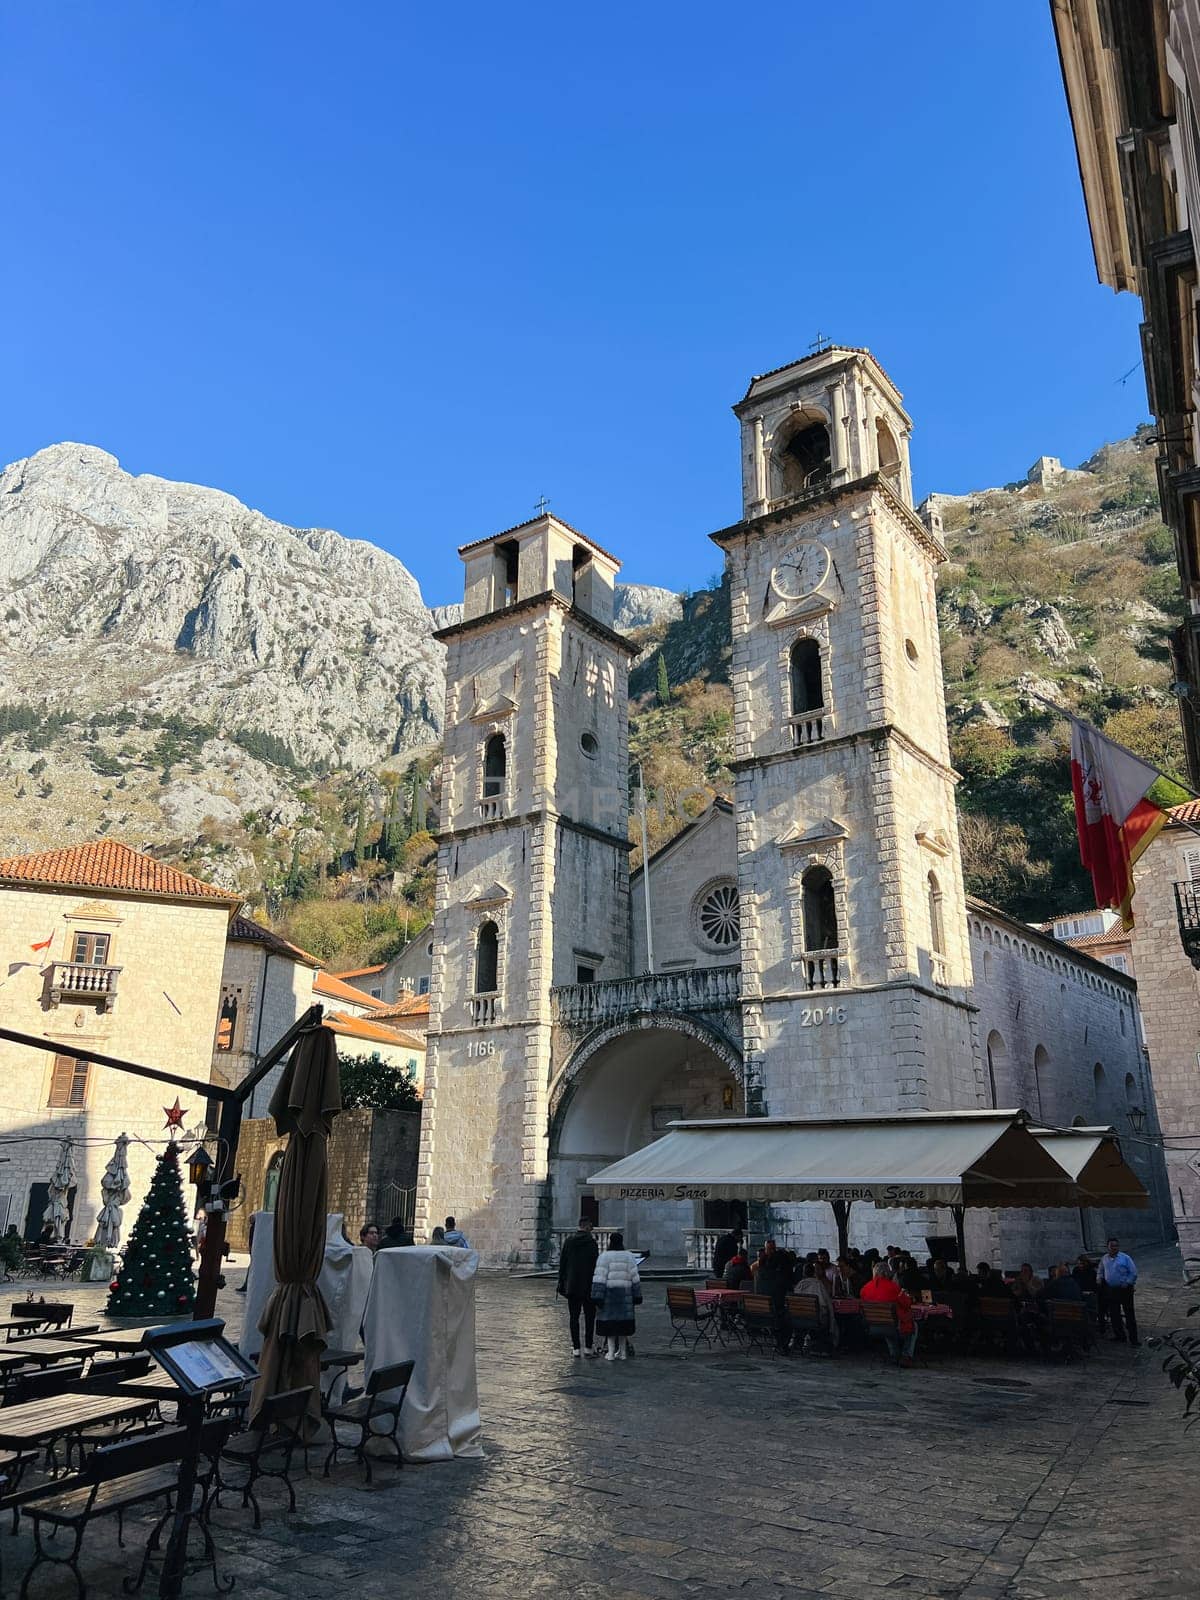 Kotor, Montenegro - 25 december 2022: Ancient bell towers of the Cathedral of St. Tryphon in Kotor against the backdrop of the mountains. Montenegro by Nadtochiy